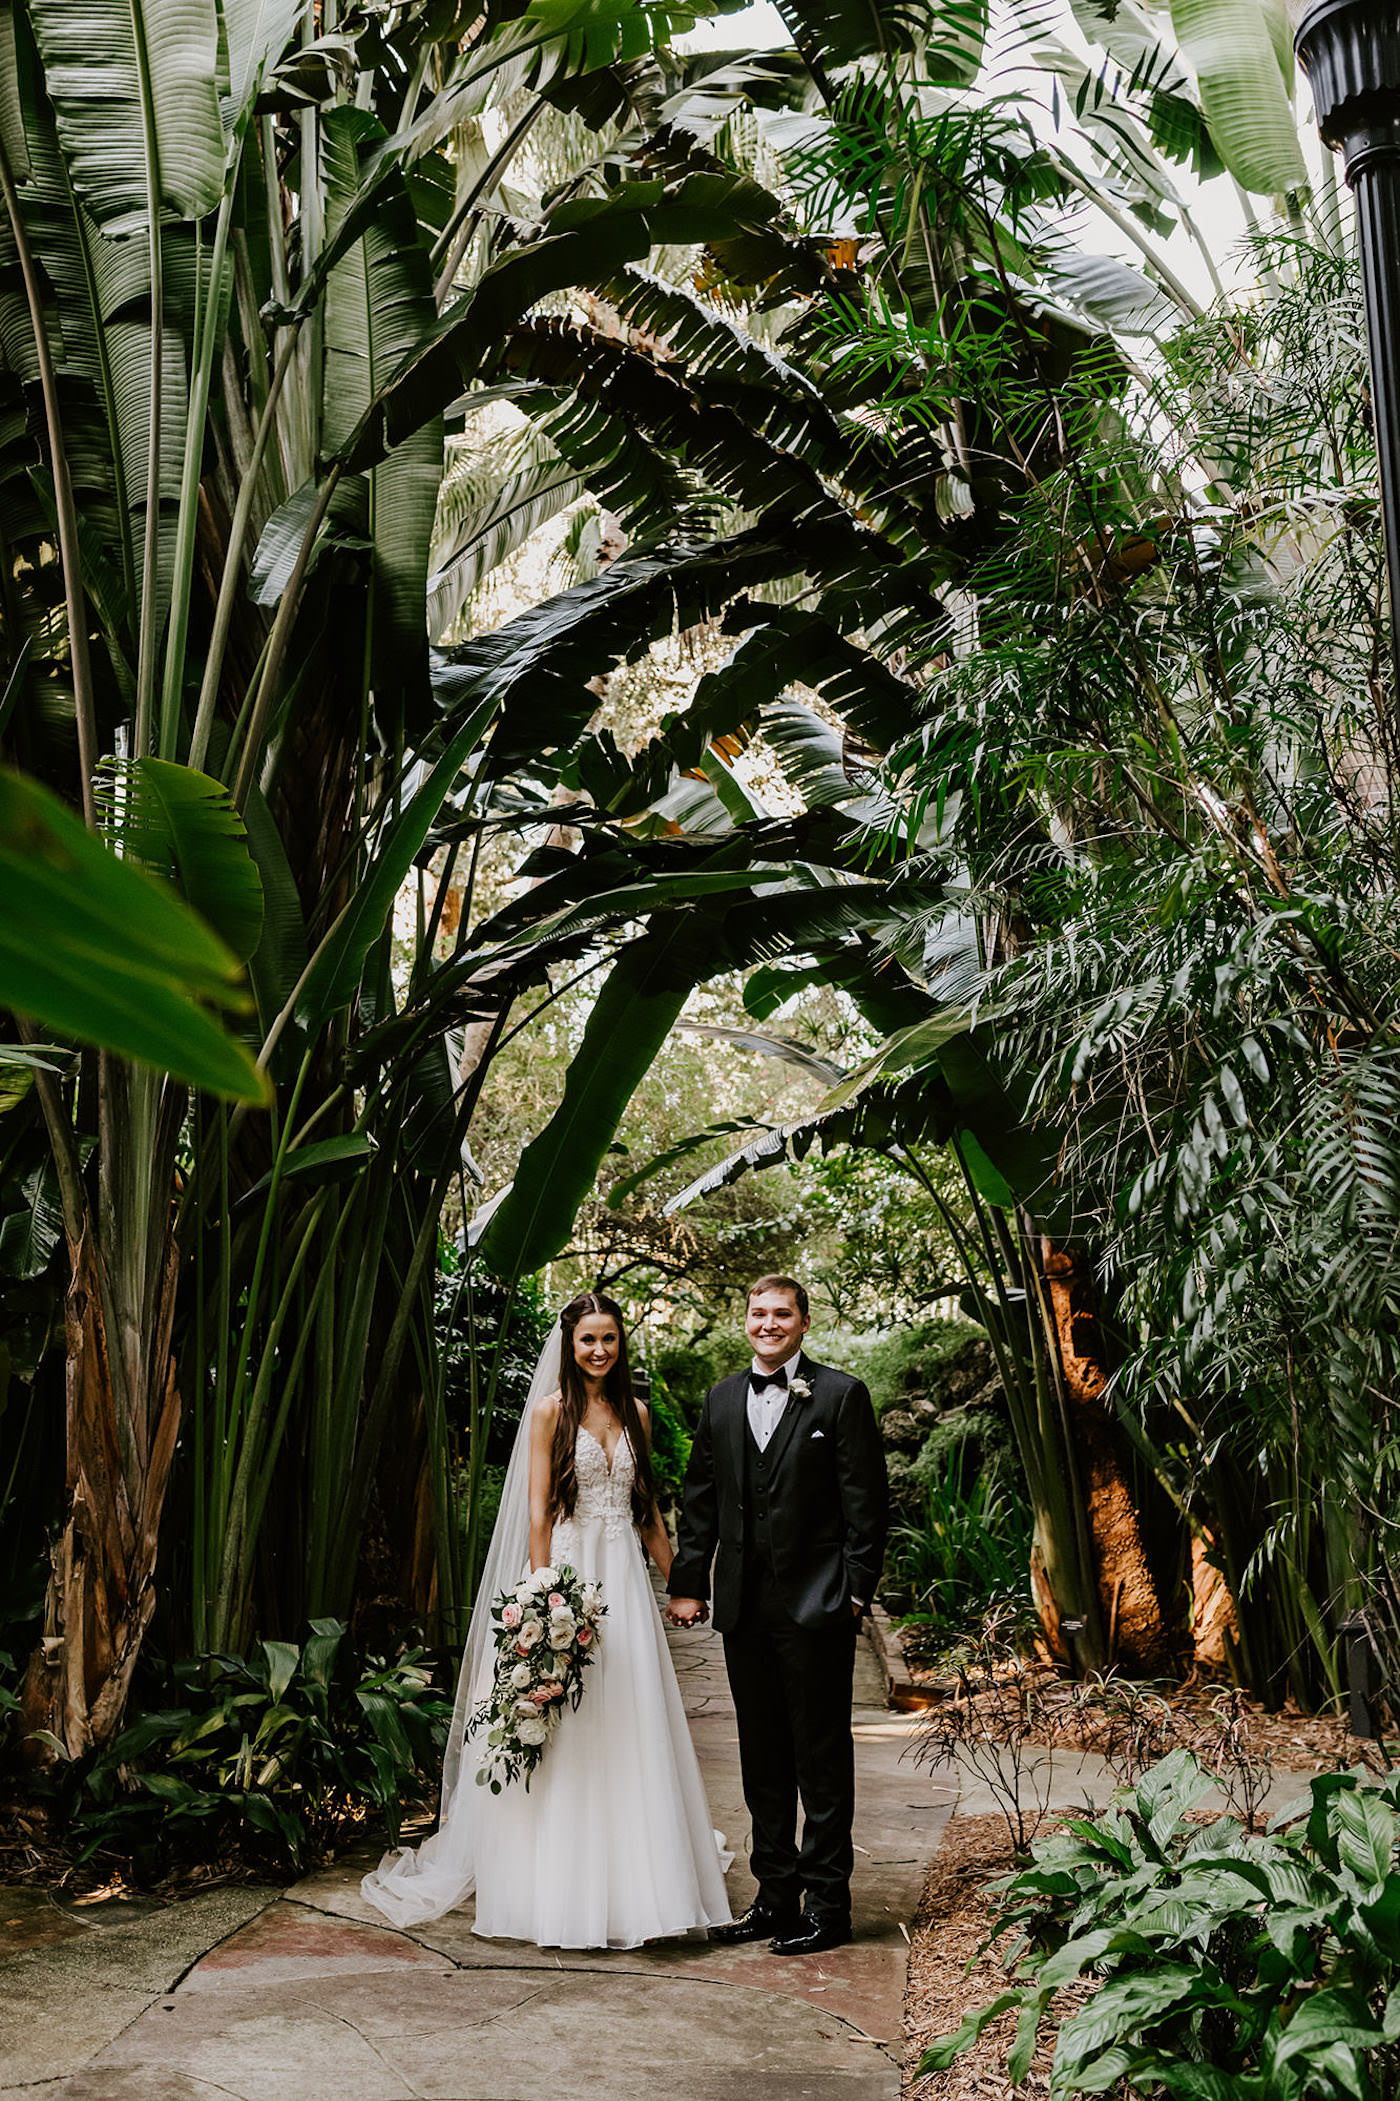 Bride and Groom Outdoor Garden Wedding Portraits | St. Pete Wedding | Lace and Organza Wedding Dress Bridal Gown with Cathedral Veil | Groom in Classic Black Tuxedo Suit with Bow Tie